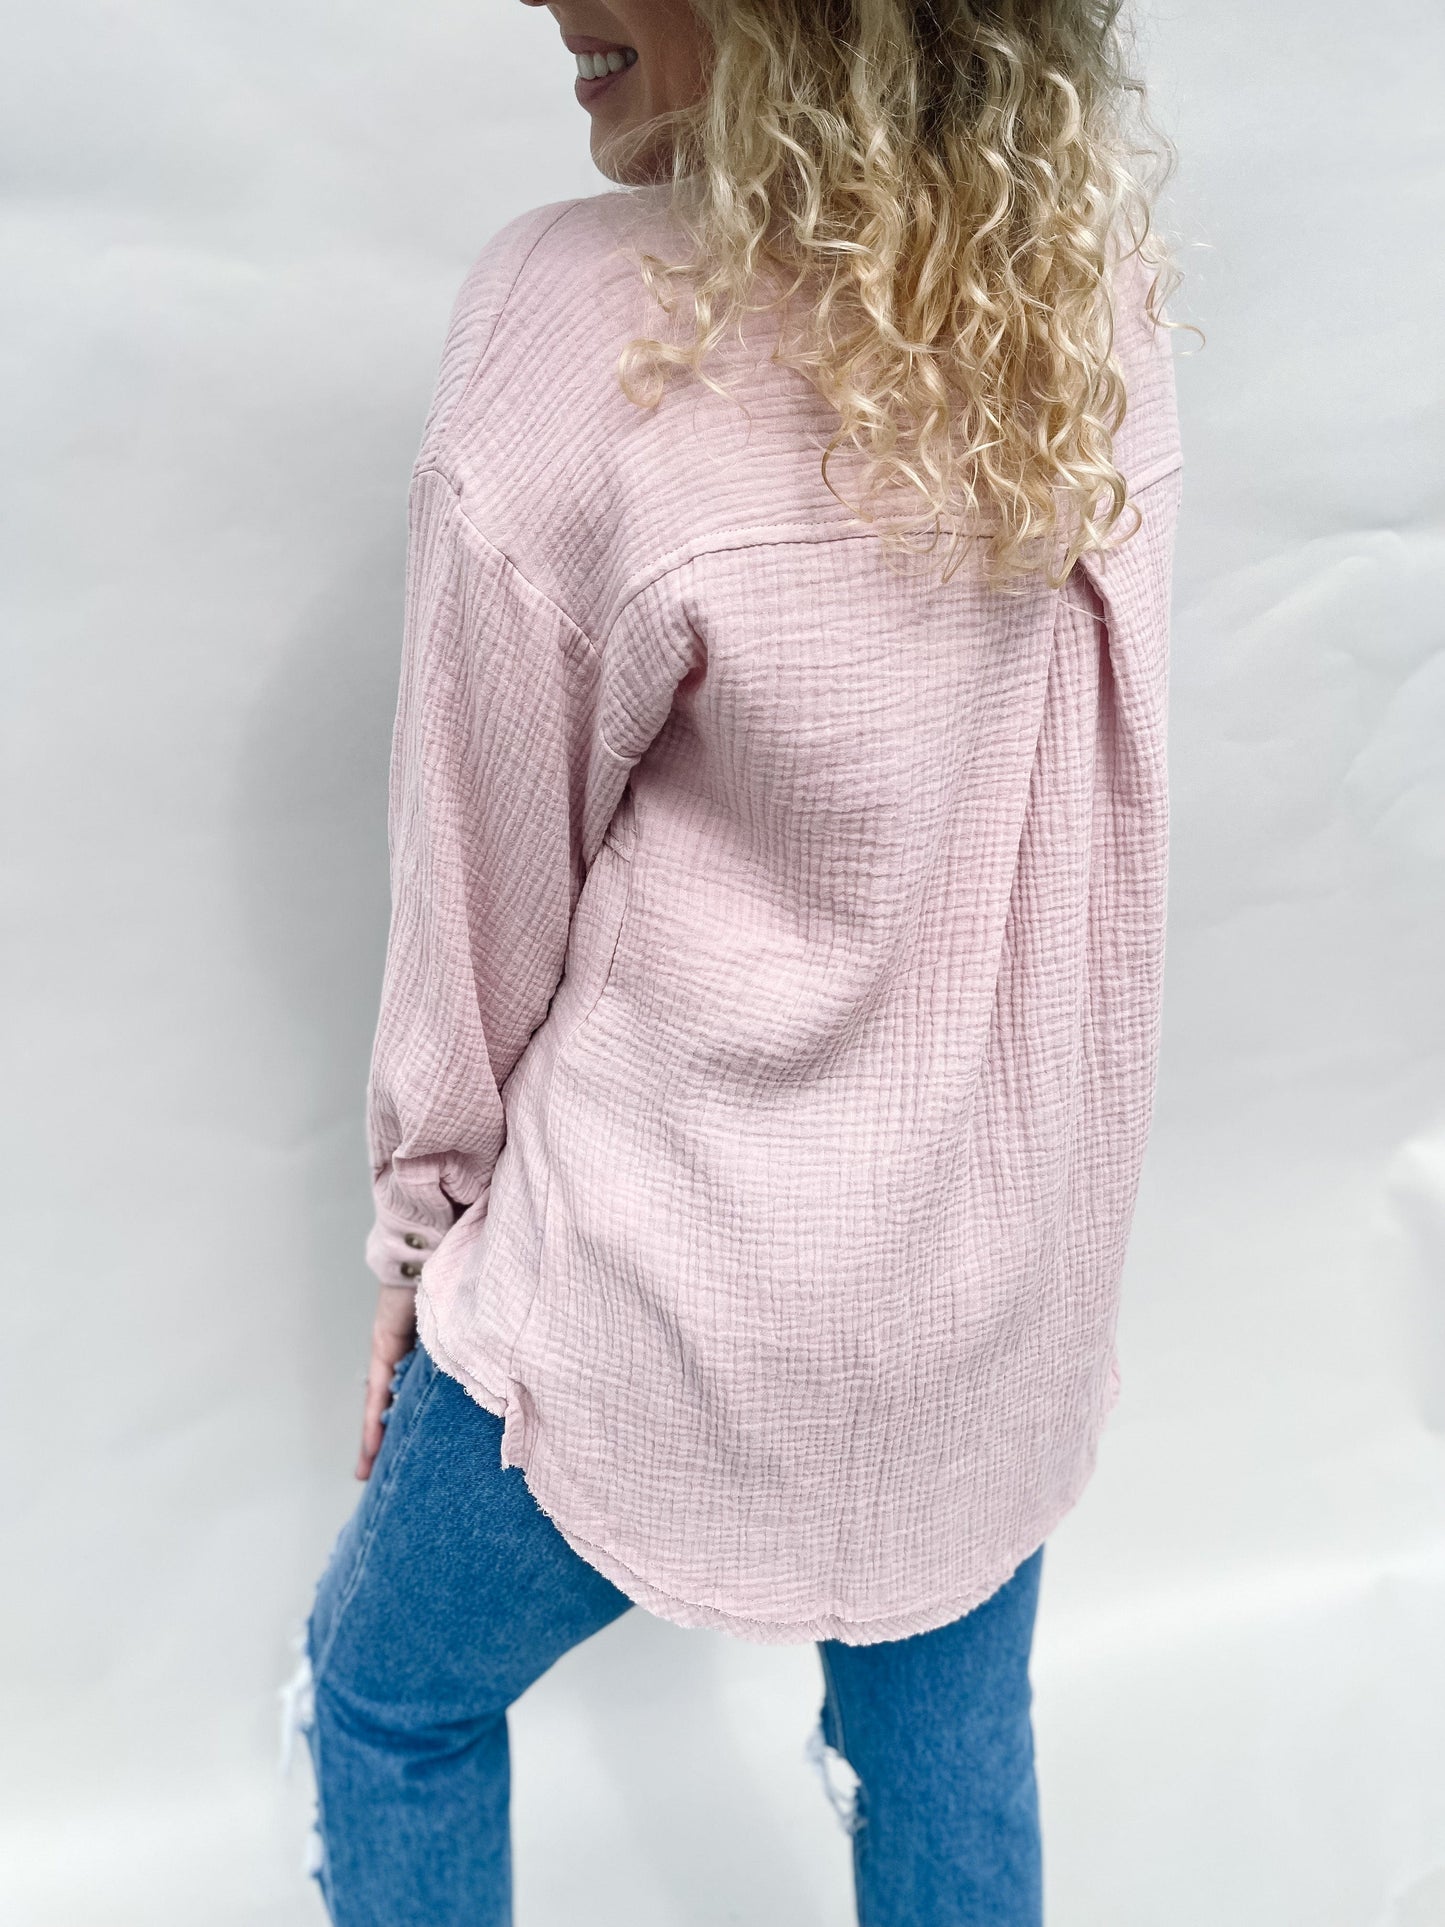 Back view of a fashionable model wearing a light pink linen button-up shirt with a longer back that covers the bottom, paired with jeans and a trendy hat. The model looks back over her shoulder with a happy smile